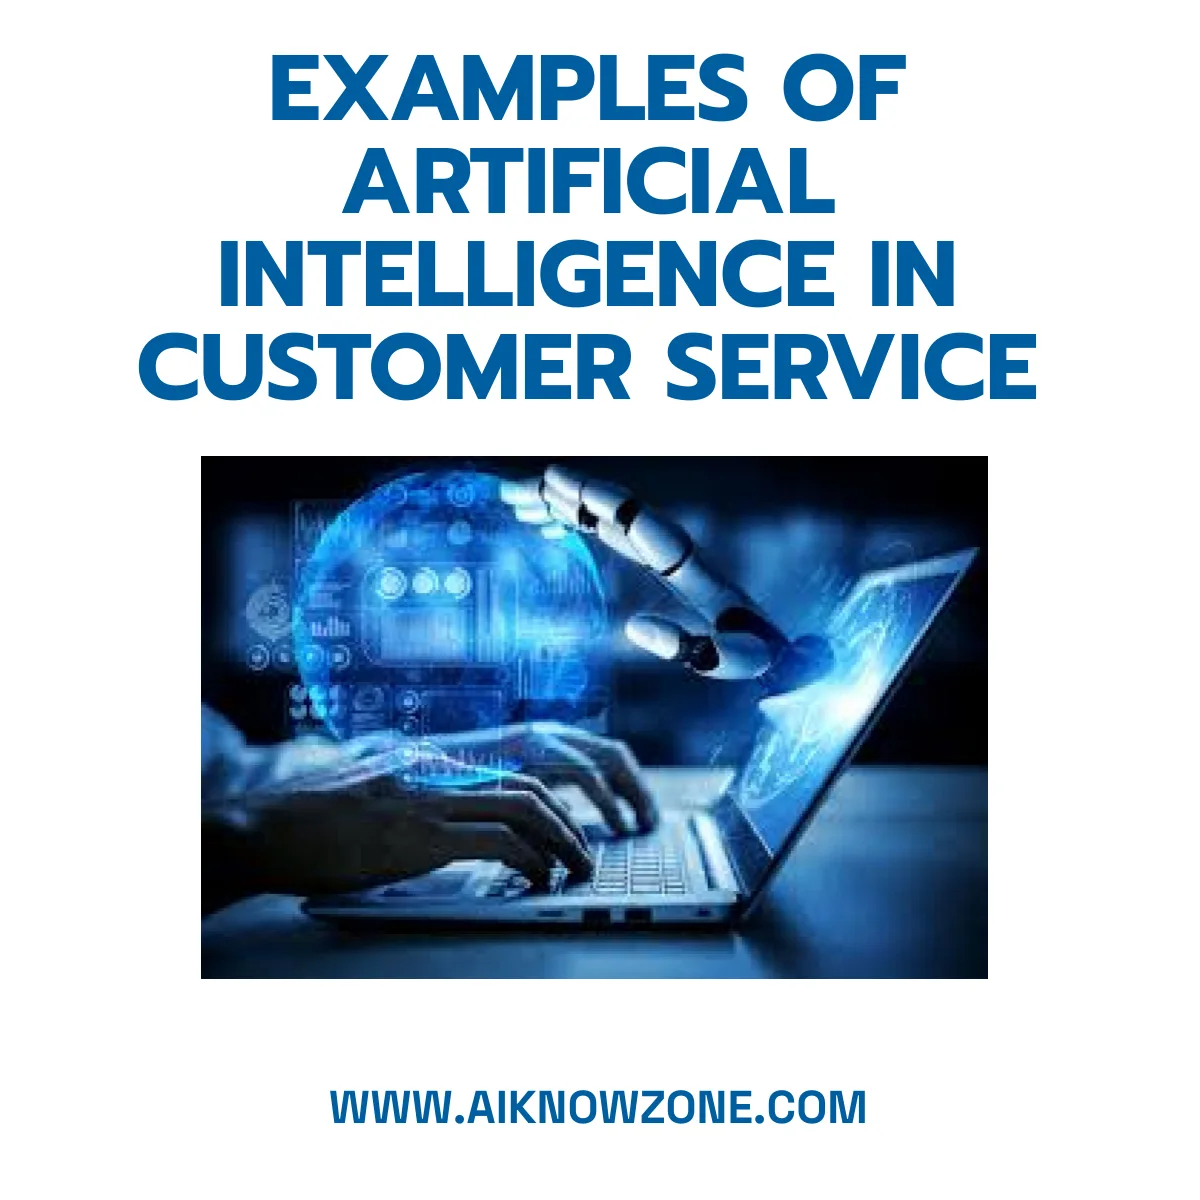 Examples of Artificial Intelligence in Customer Service